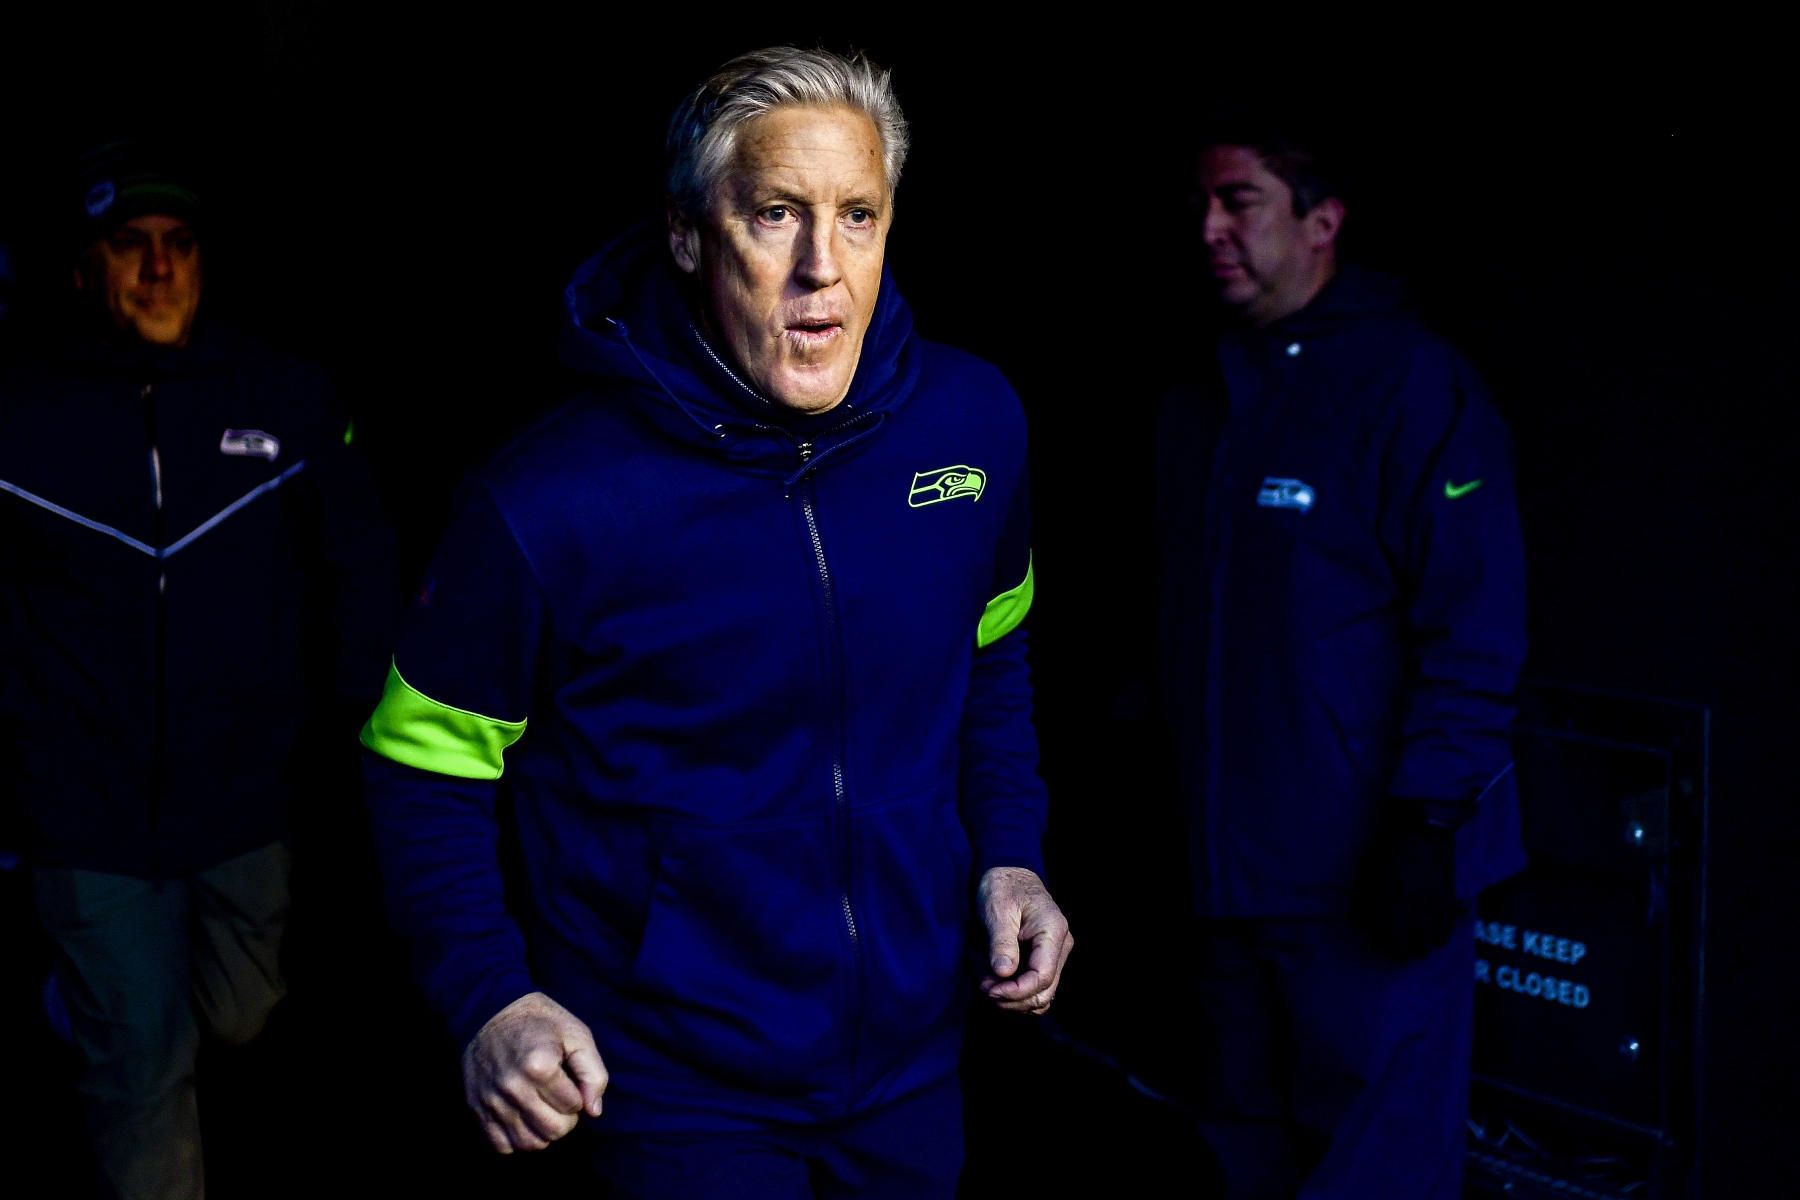 Pete Carroll has led the Seattle Seahawks to a ton of success. However, he is 69 years old, so what is his future with the Seahawks.